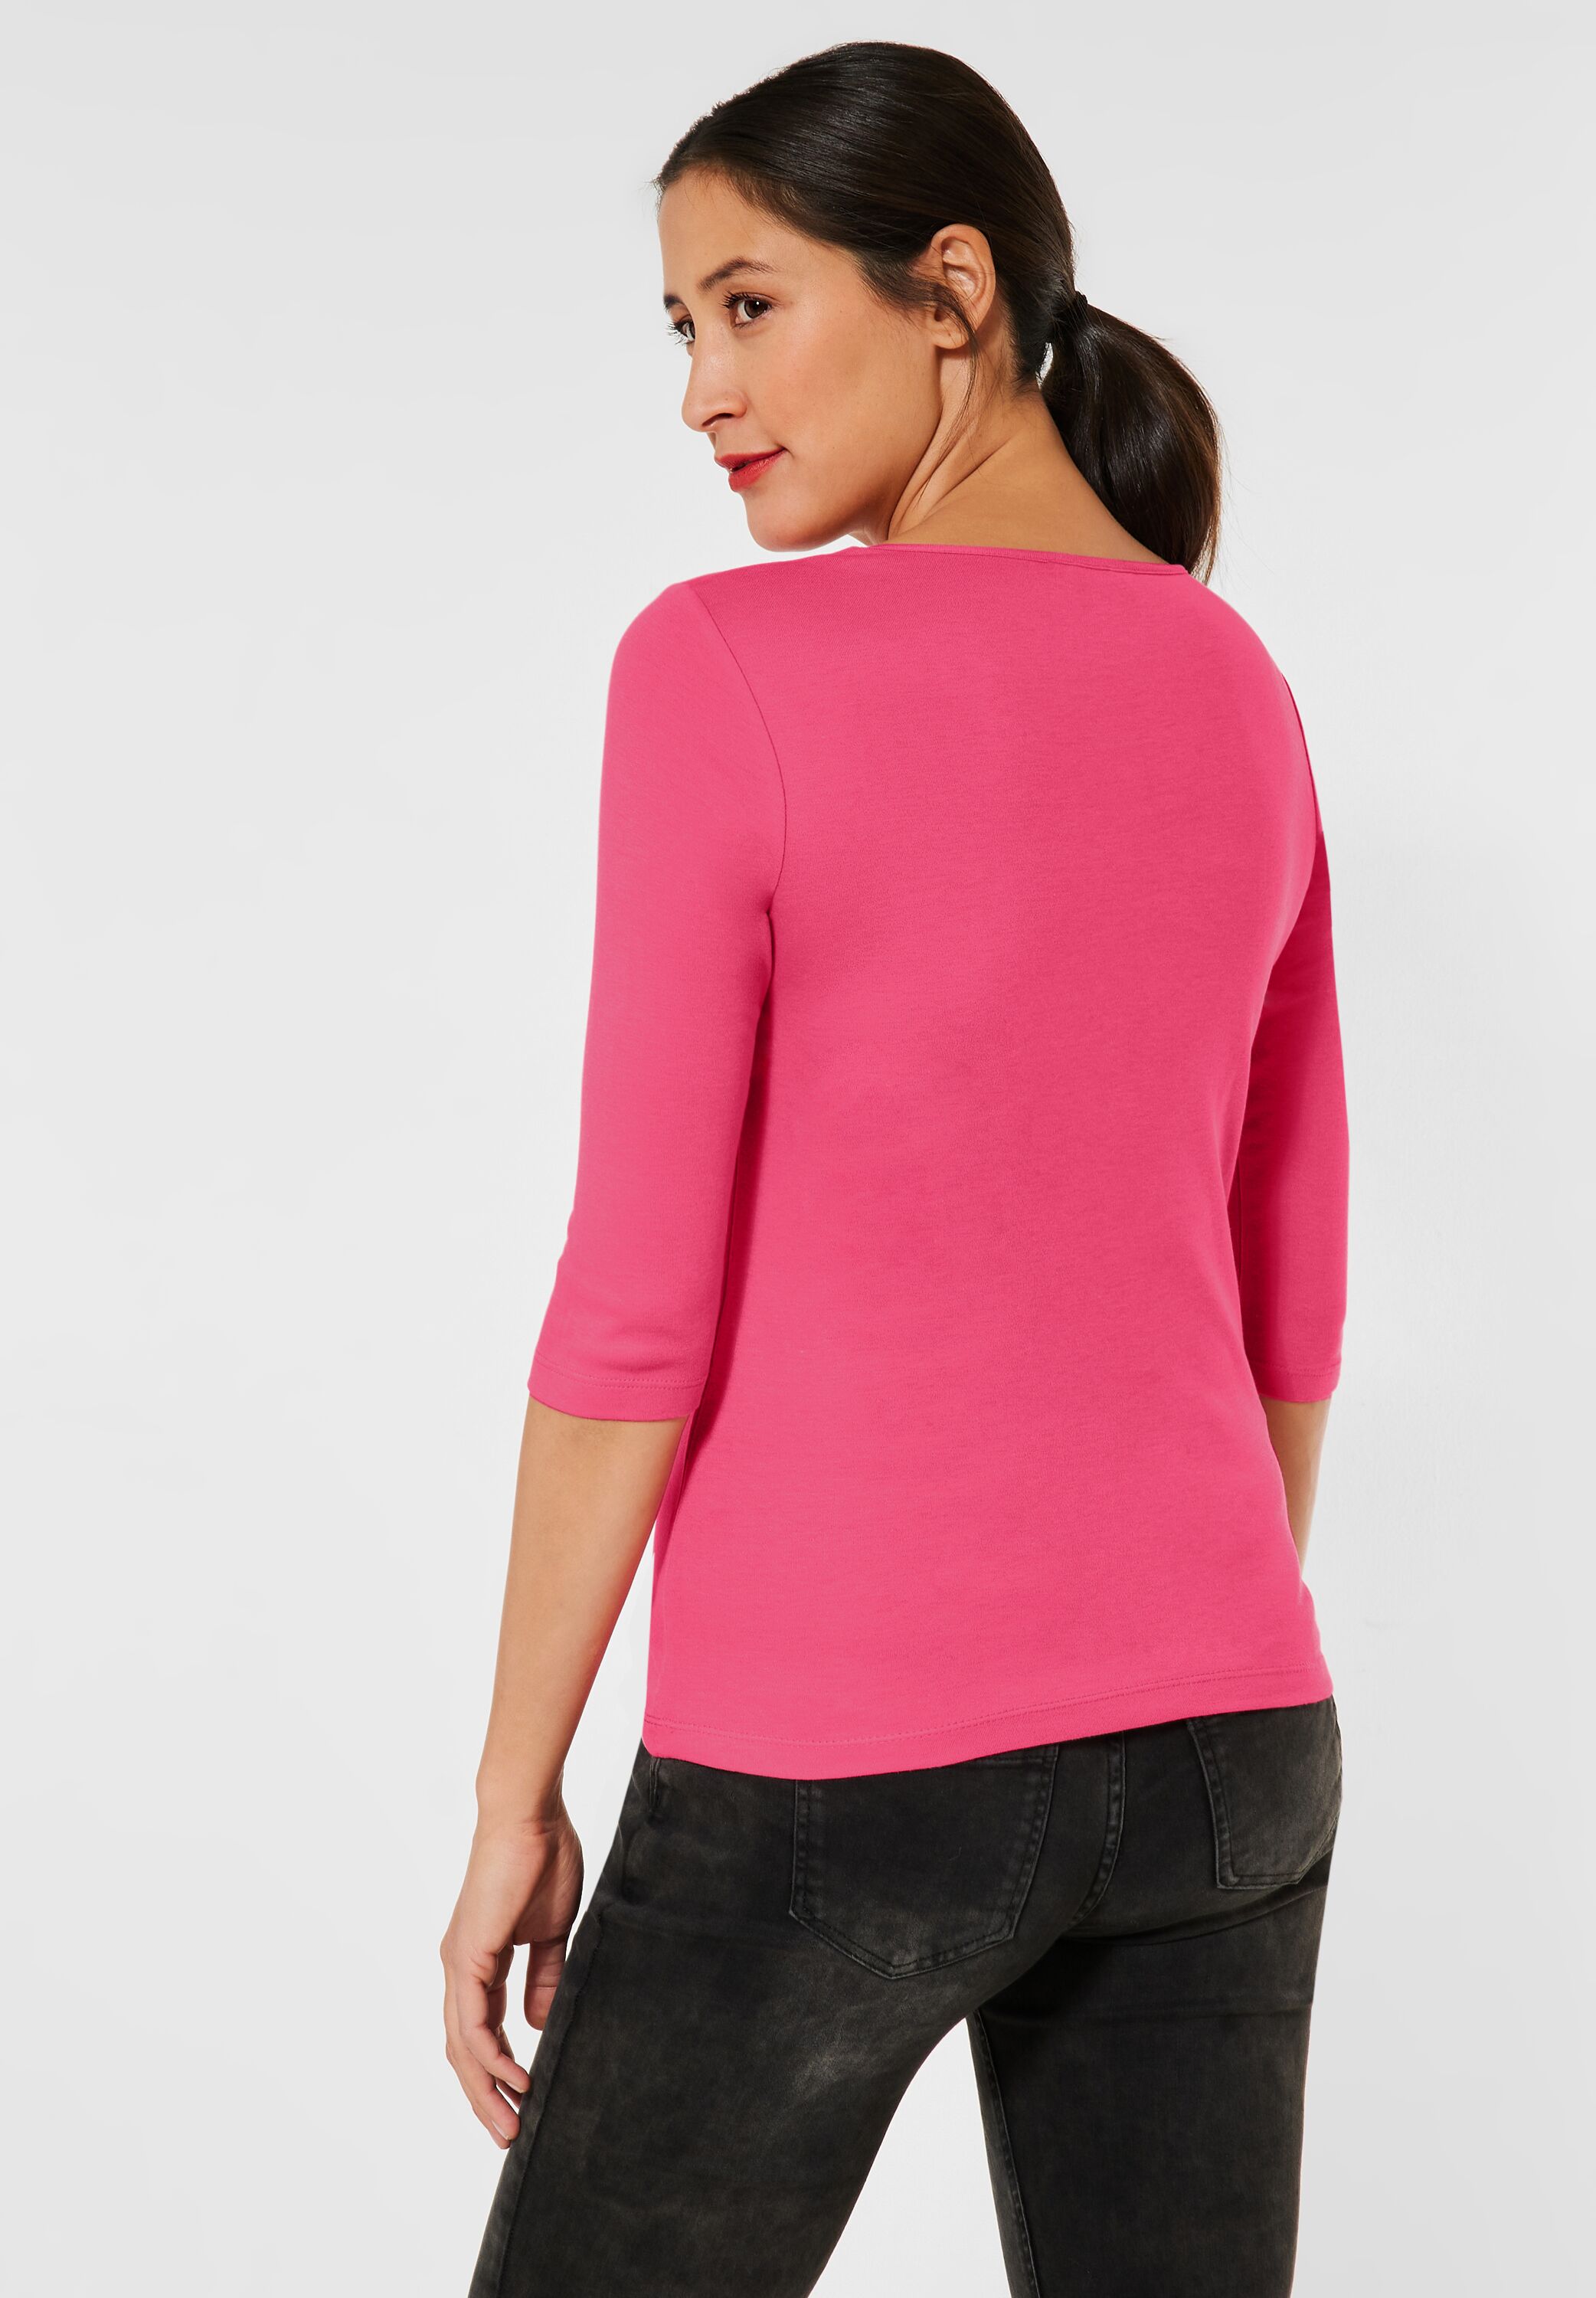 Mode Berry Shirt reduziert CONCEPT One A317588-14647 Rose im Pania - in Street SALE